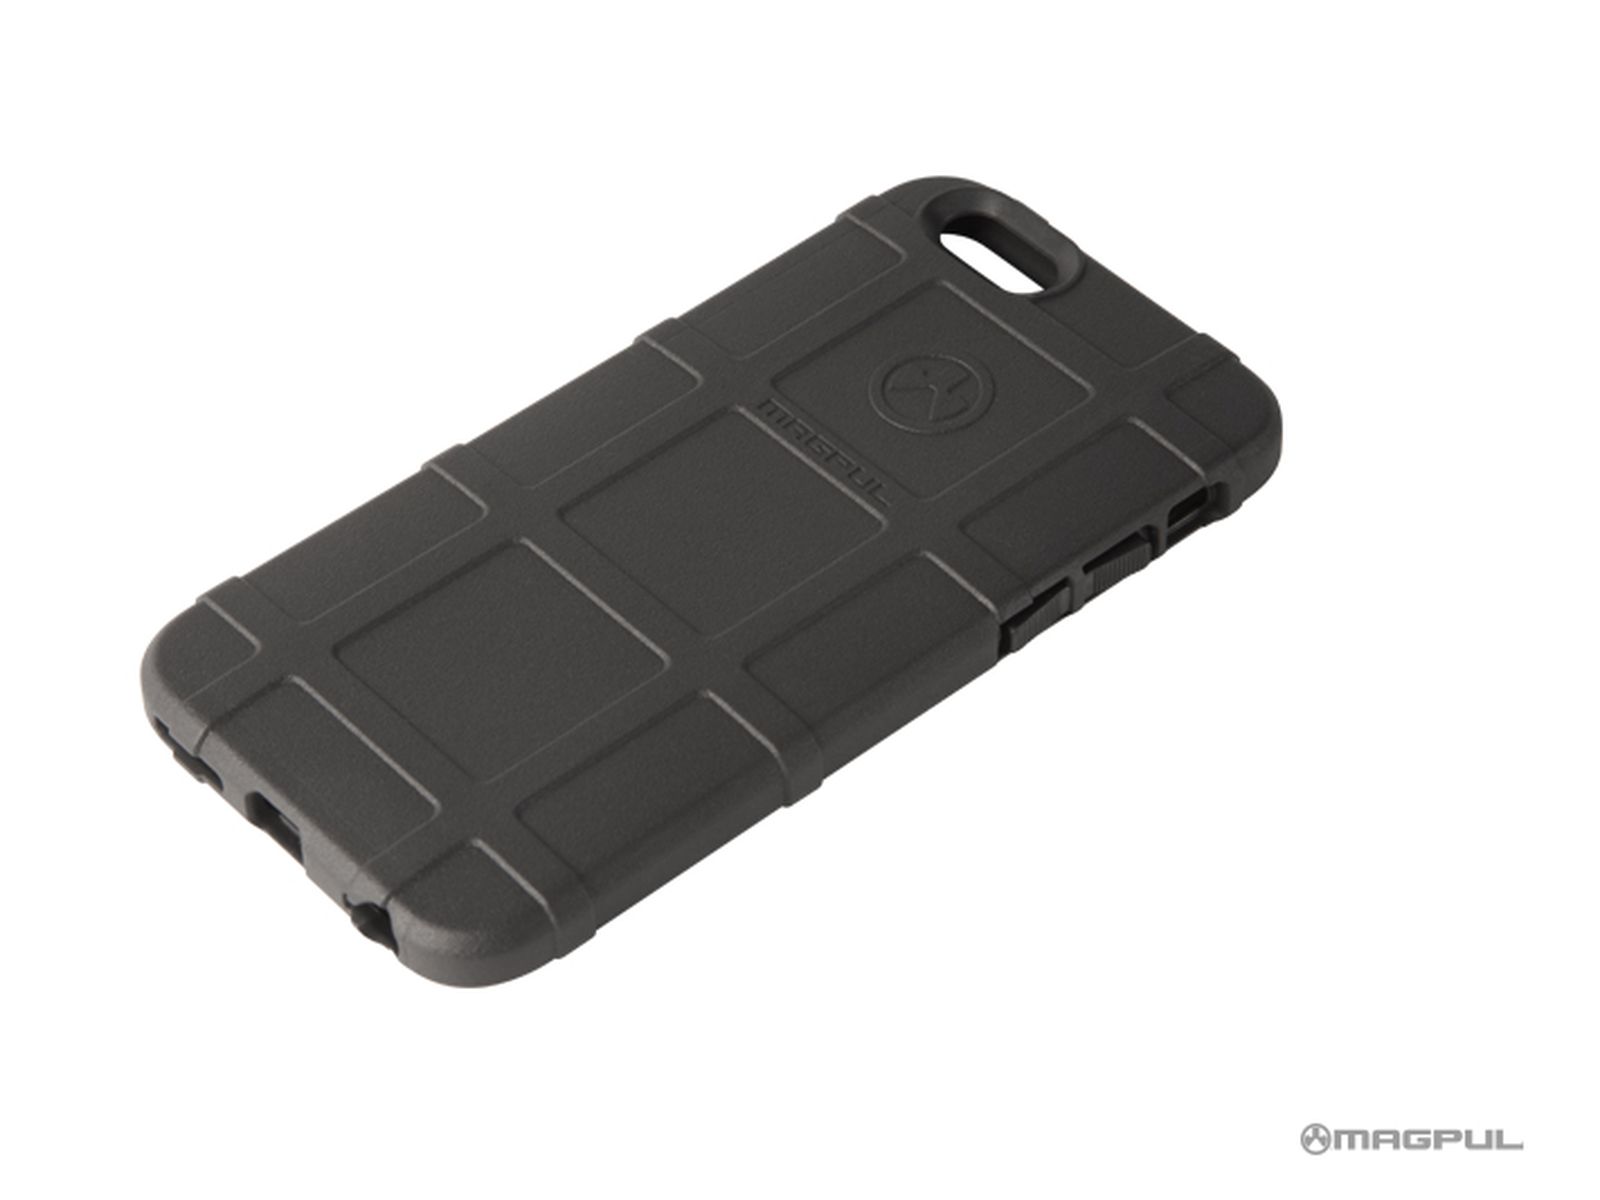 Magpul Updates Its Popular Field Case For Iphone 6 And 6 Plus Macrumors